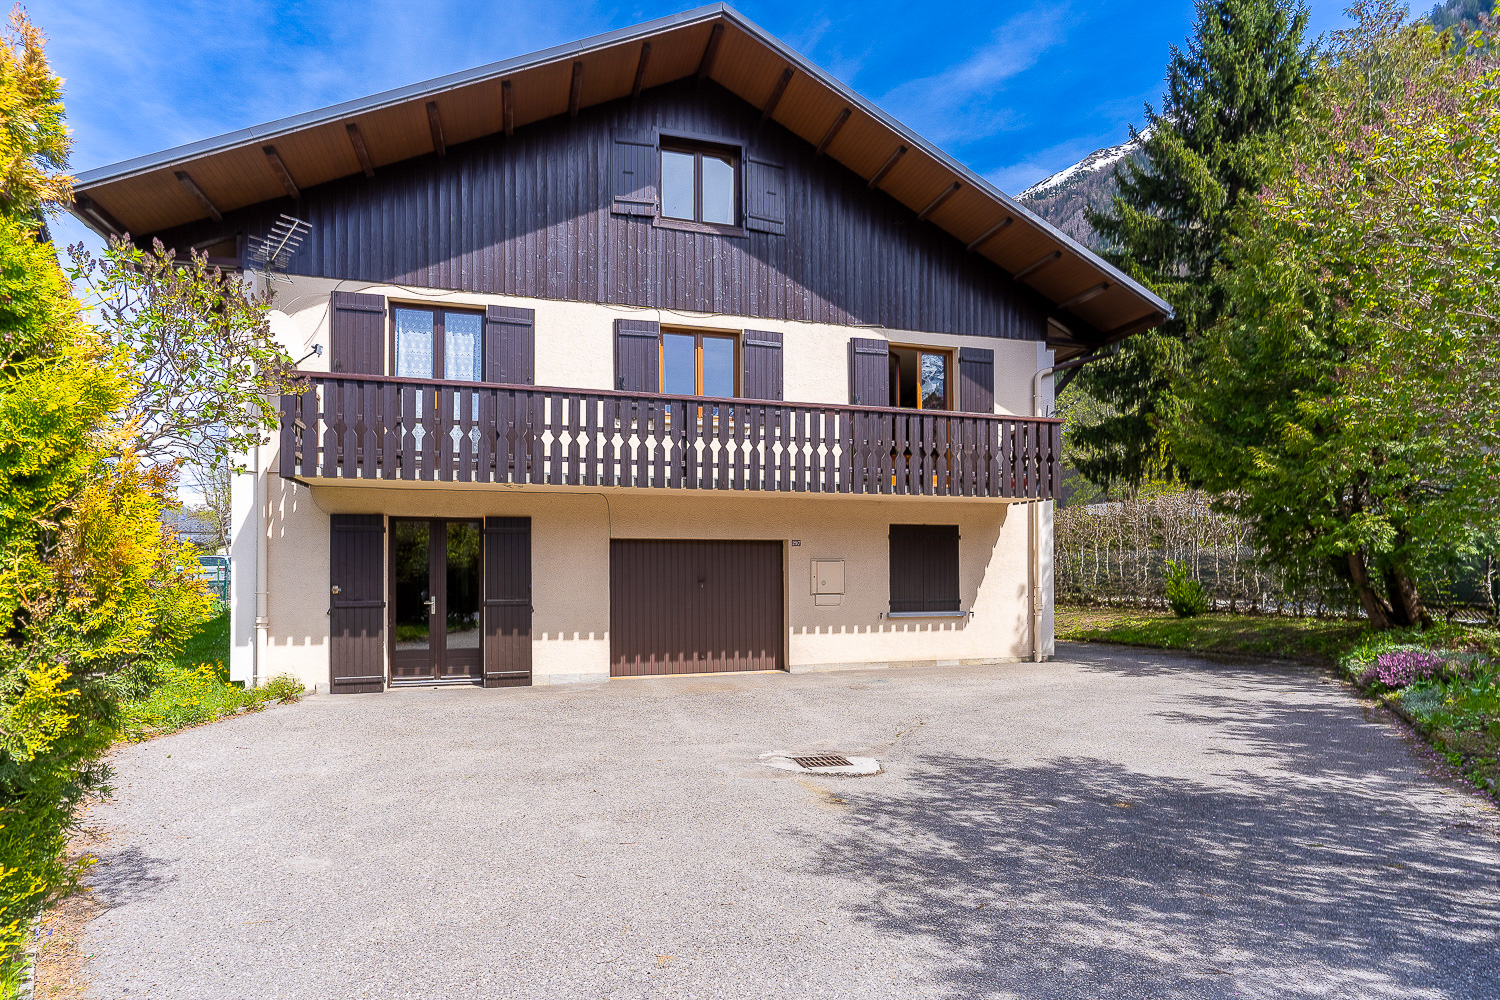 Chalet for sale a few steps to Chamonix centre